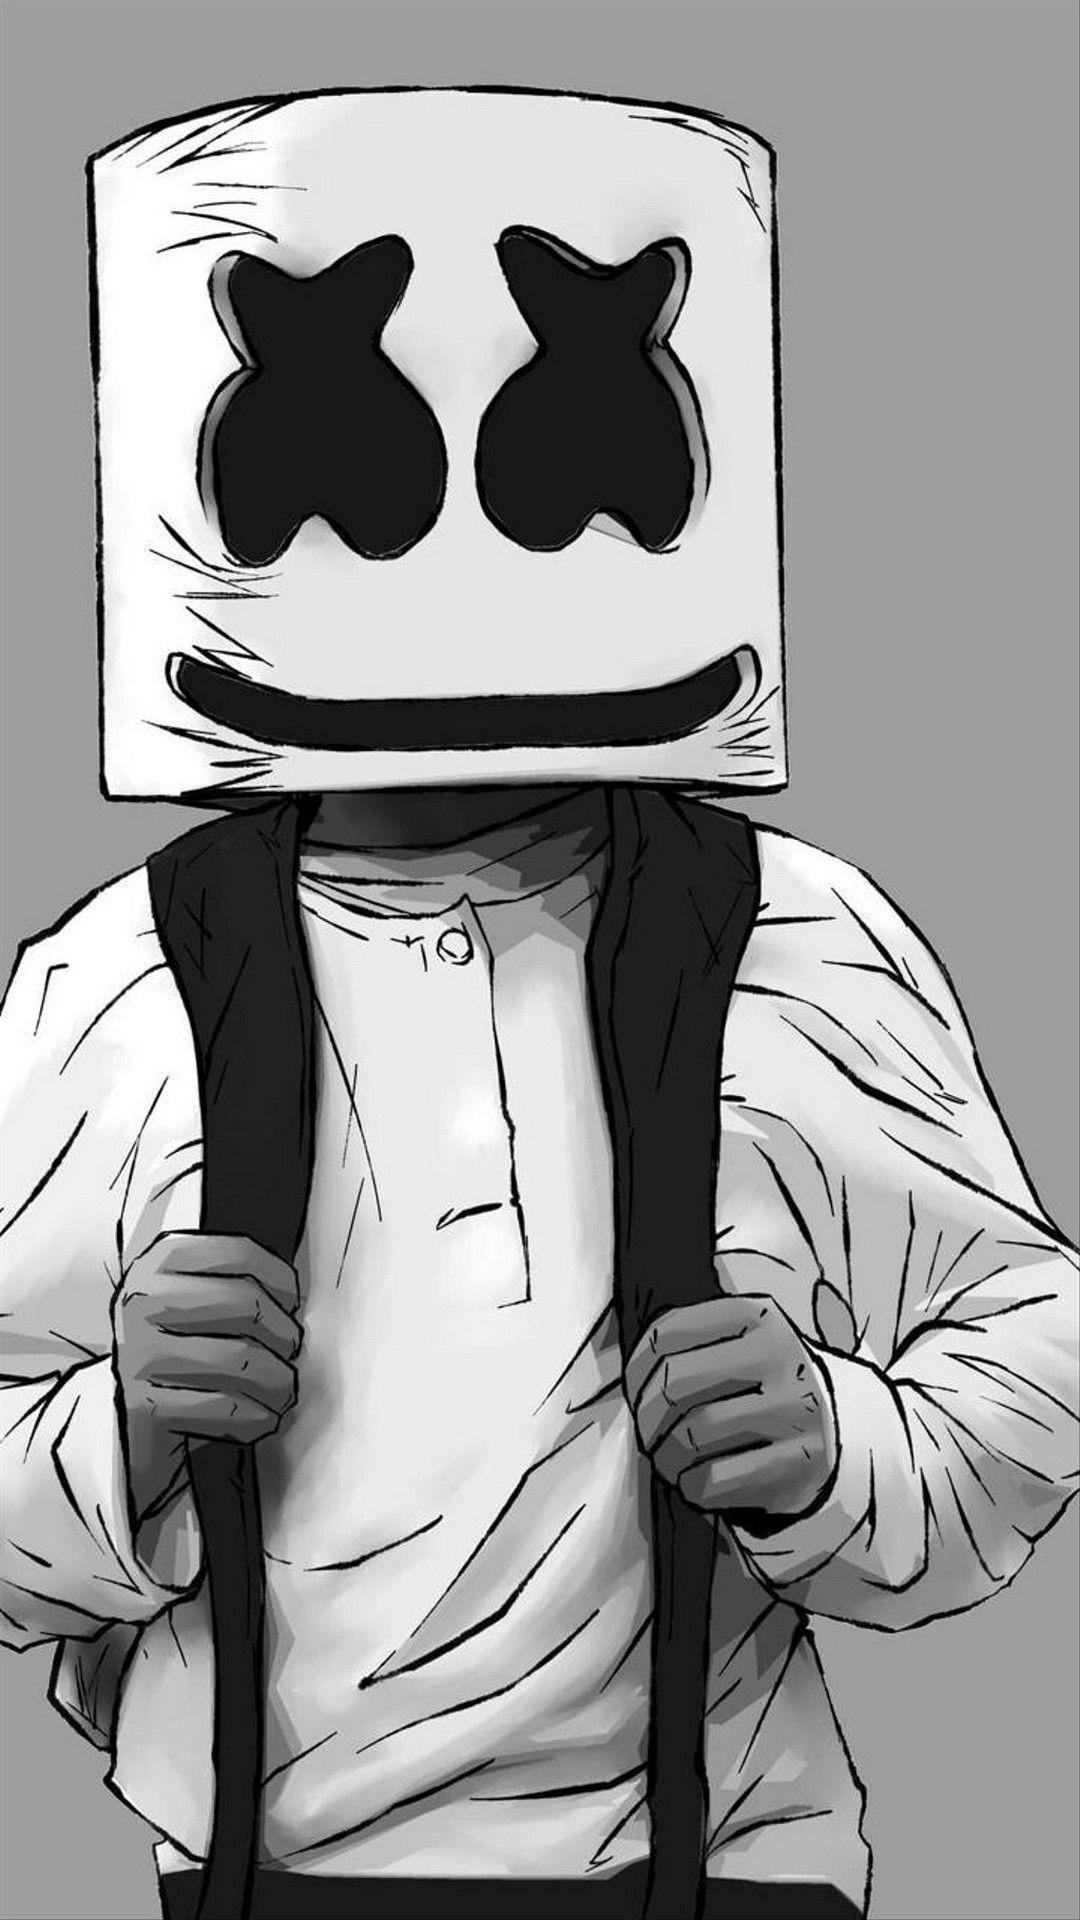 Marshmello Hd Iphone Wallpapers Top Free Marshmello Hd Iphone Backgrounds Wallpaperaccess